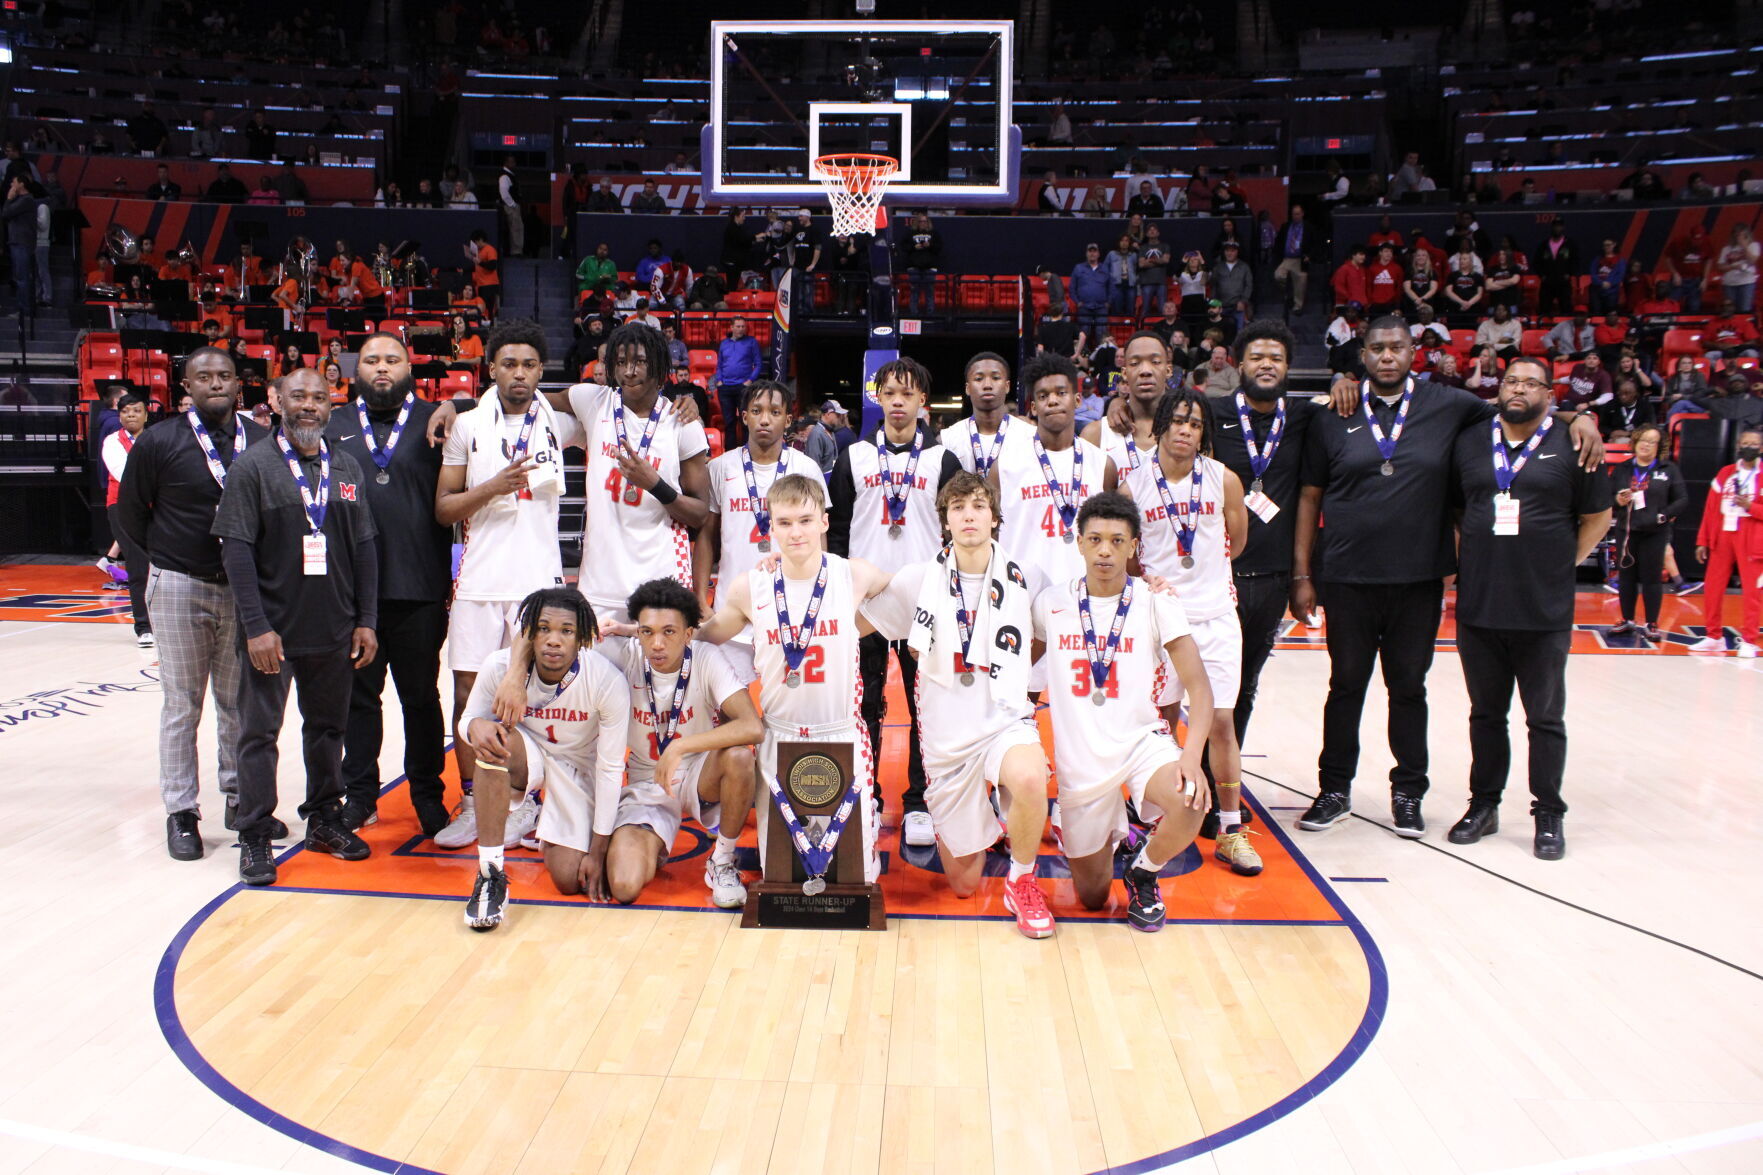 Meridian earns second-place trophy at state finals